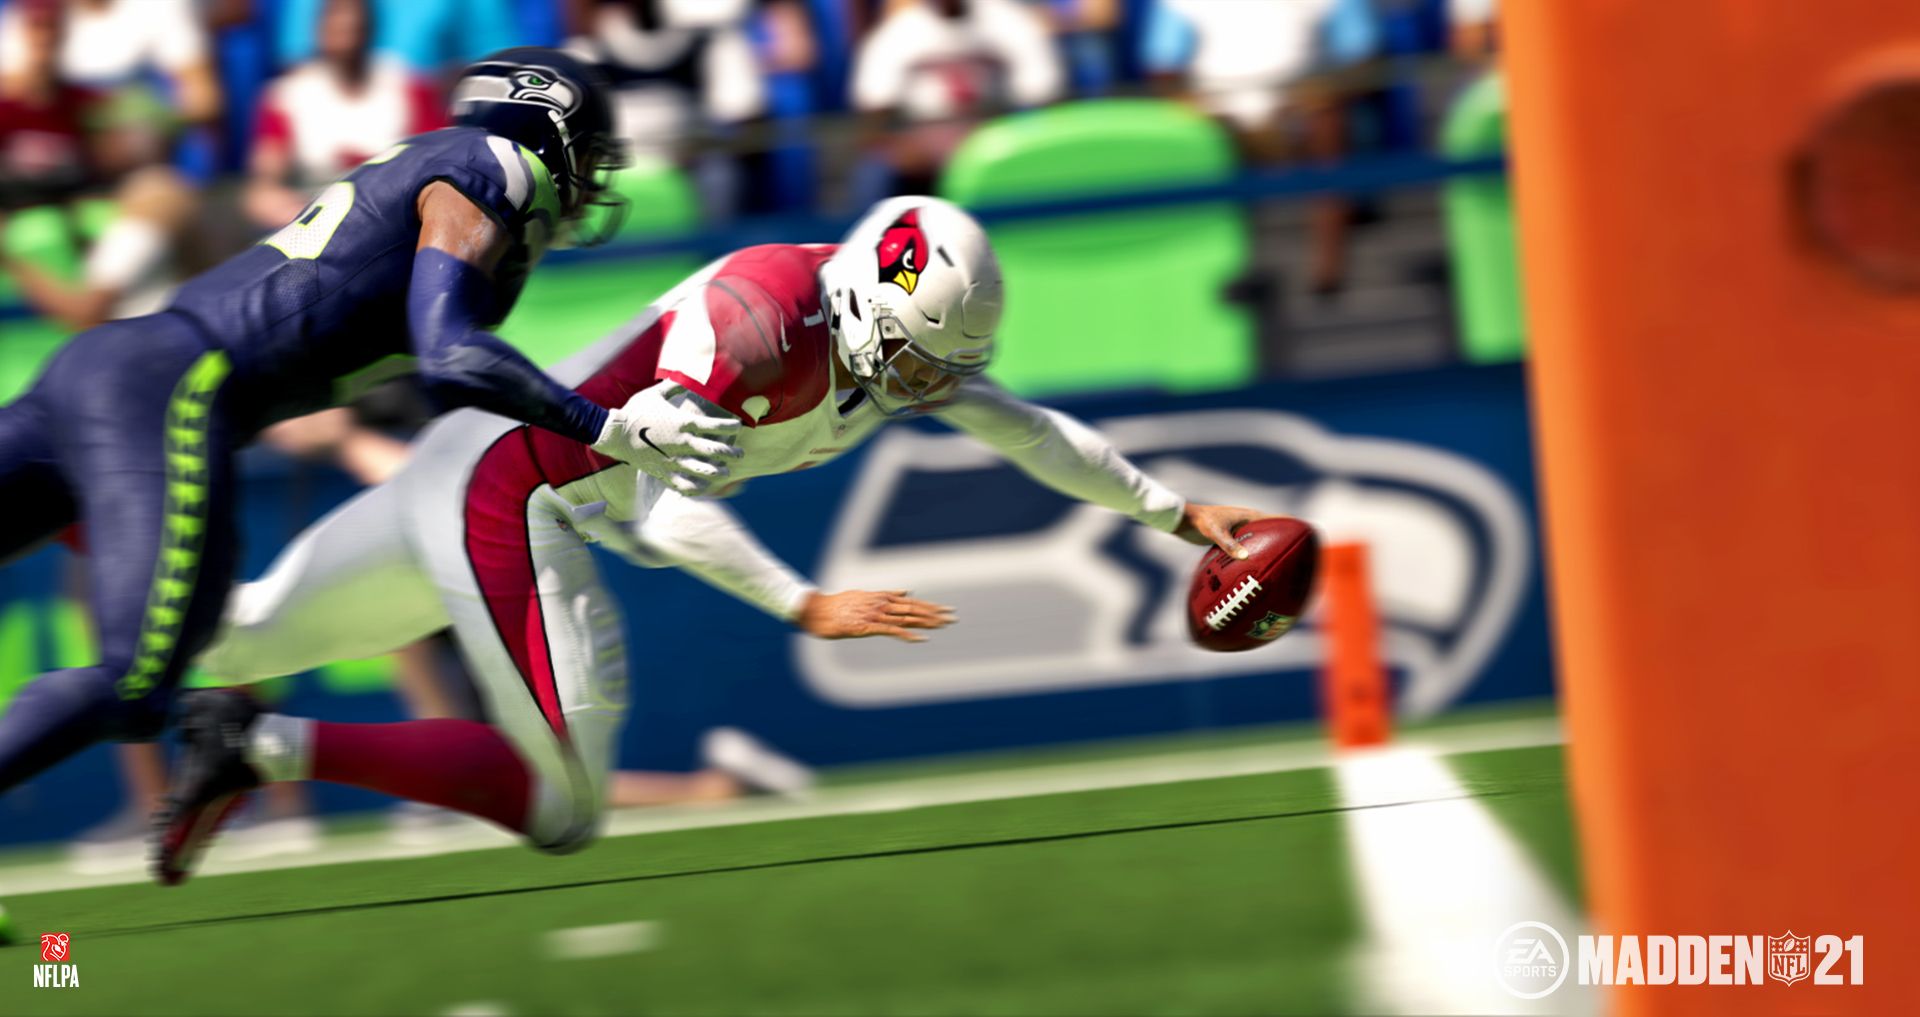 Madden NFL 21 Announced With First Details On Gameplay